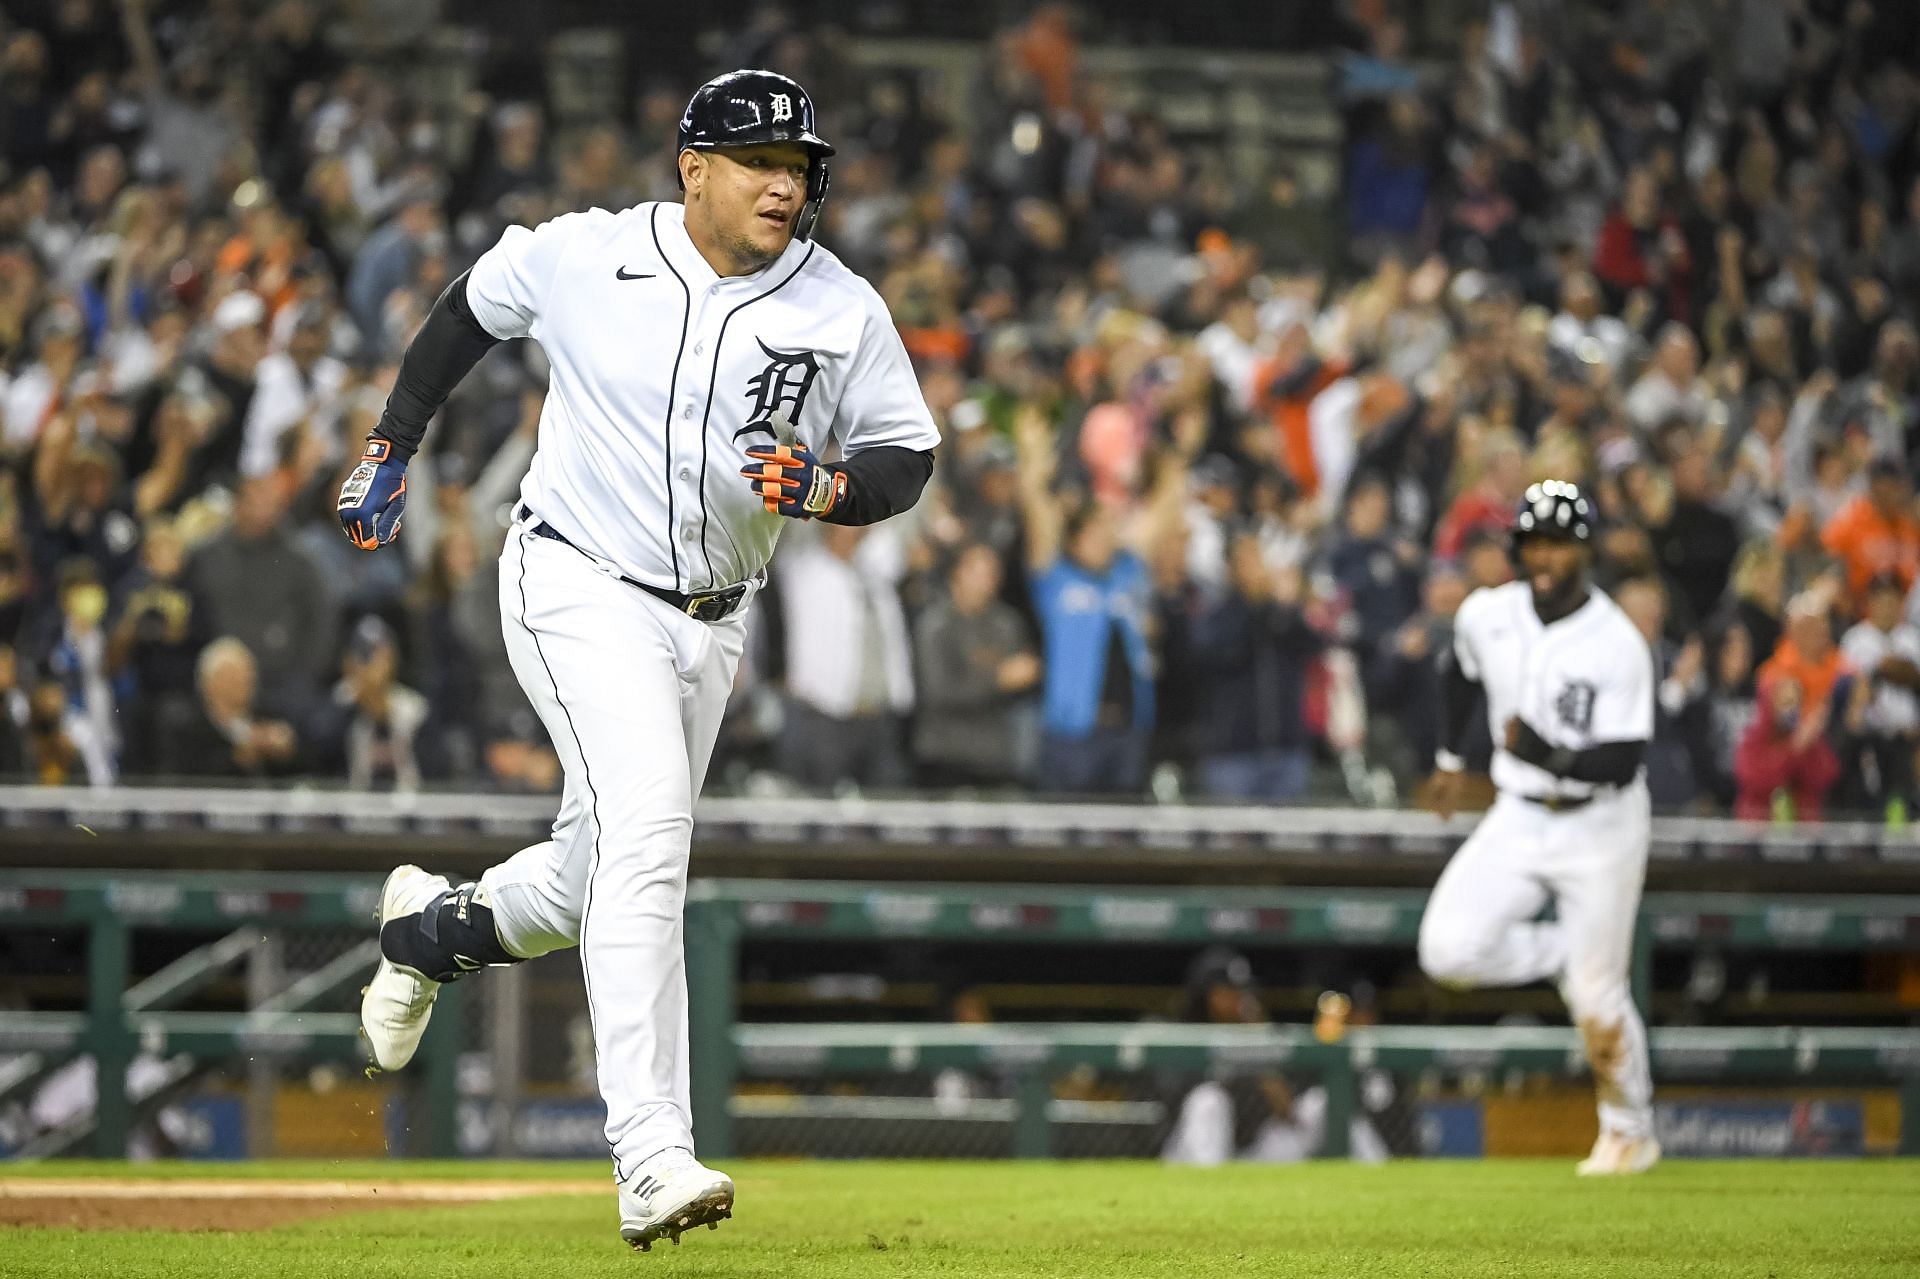 Miguel Cabrera is nearing 3,000 hits for his career